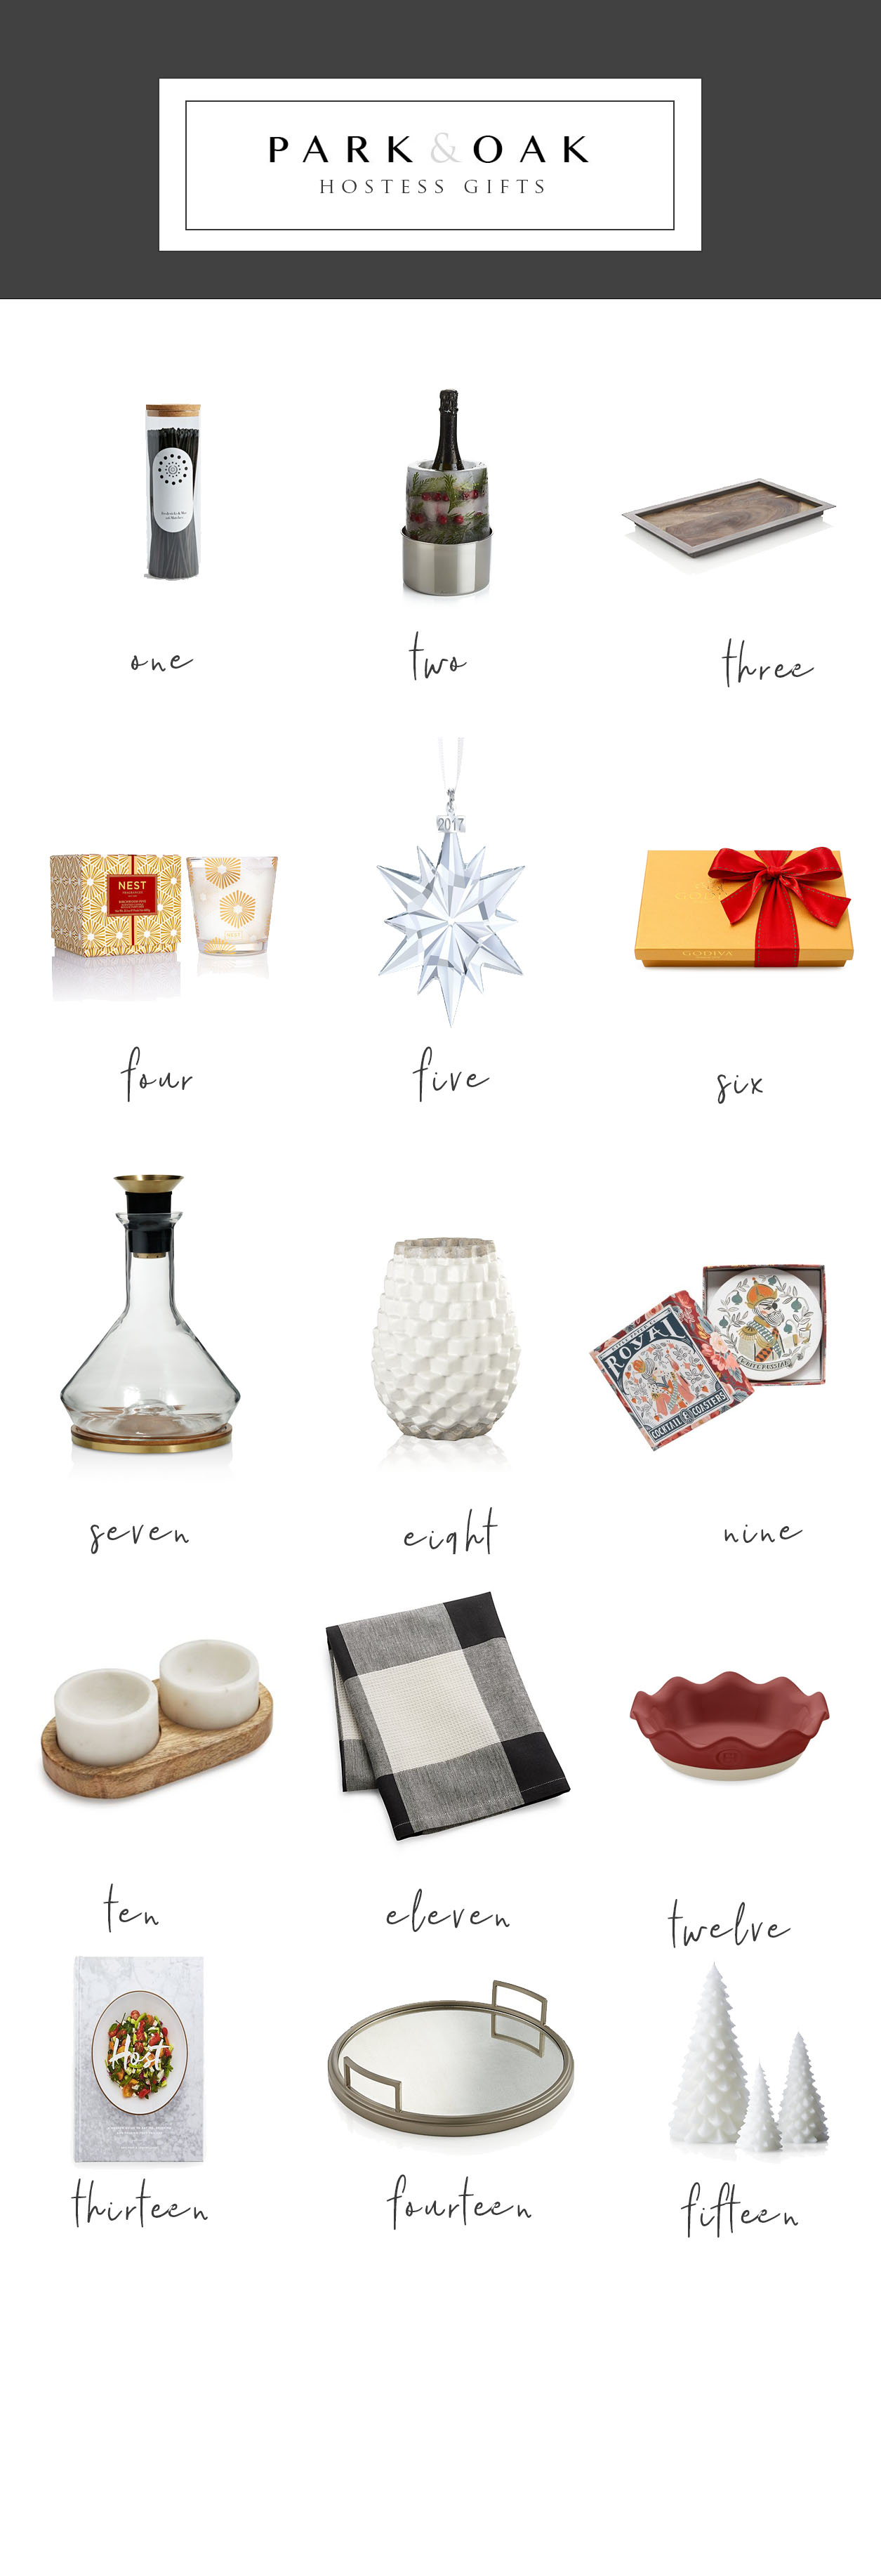 Park & Oak gifts for the host